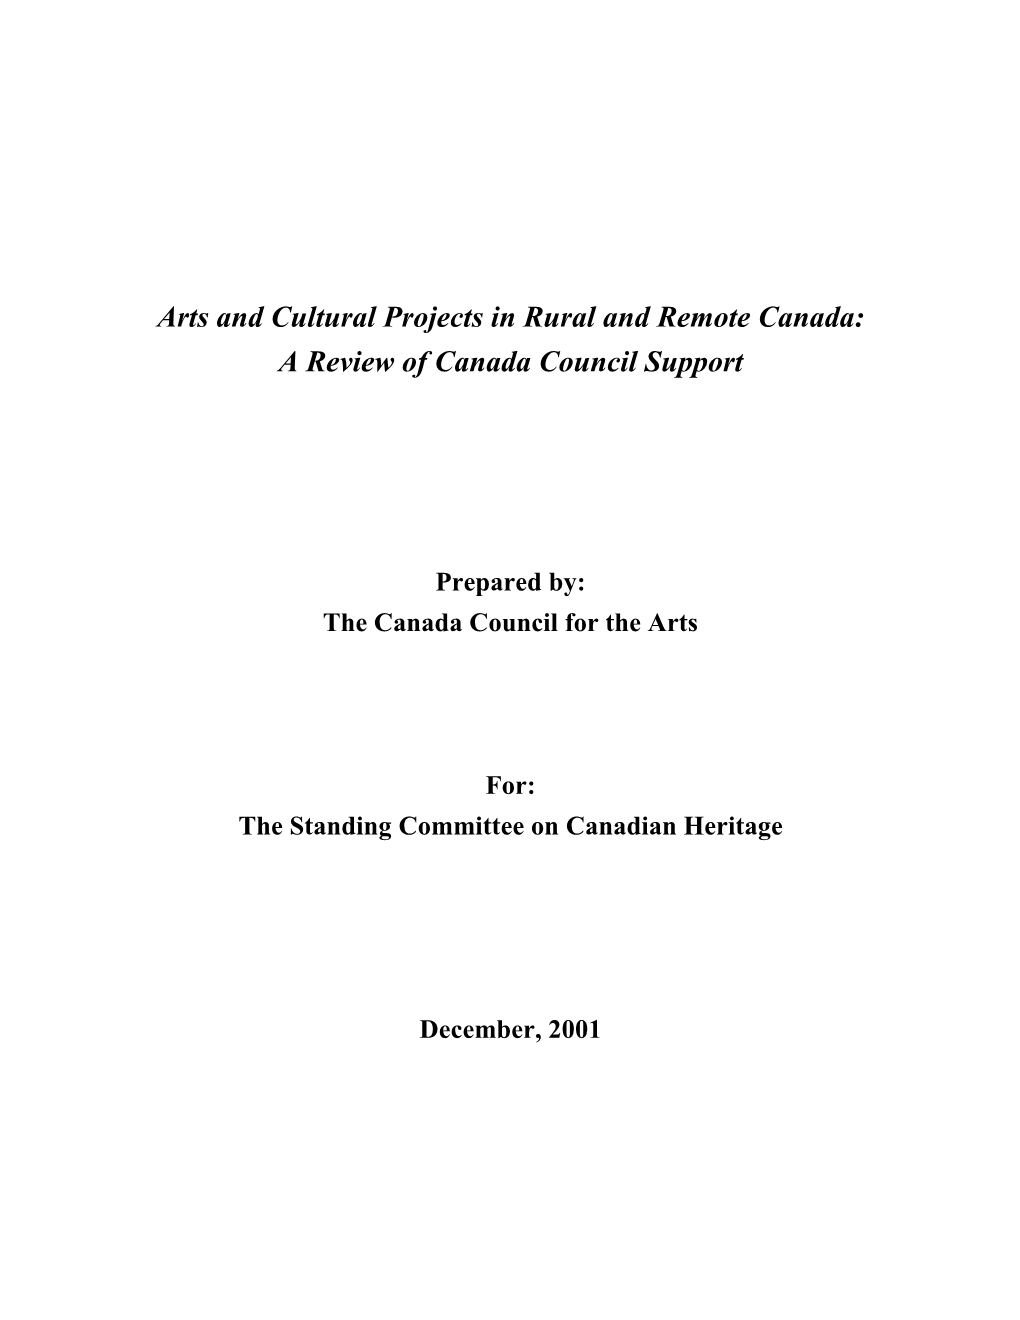 Arts and Cultural Projects in Rural and Remote Canada: a Review of Canada Council Support